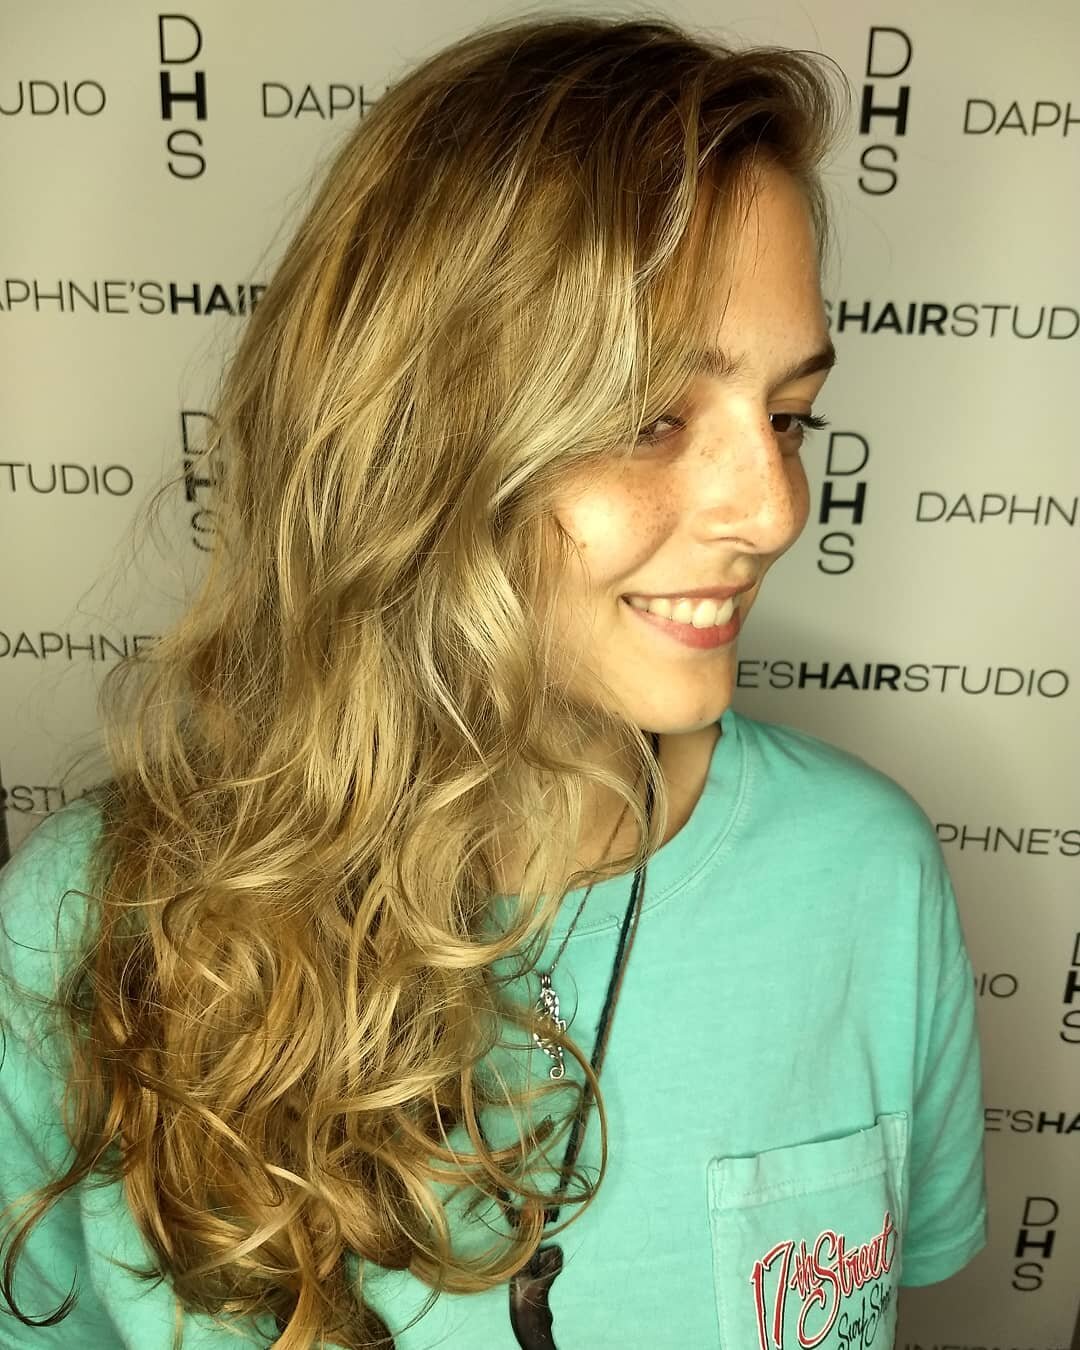 Hadley's first cut, color, and style completed!!! #daphneshairstudio #fallayage #balayage #hanzo #dhs #curl #lorealpro